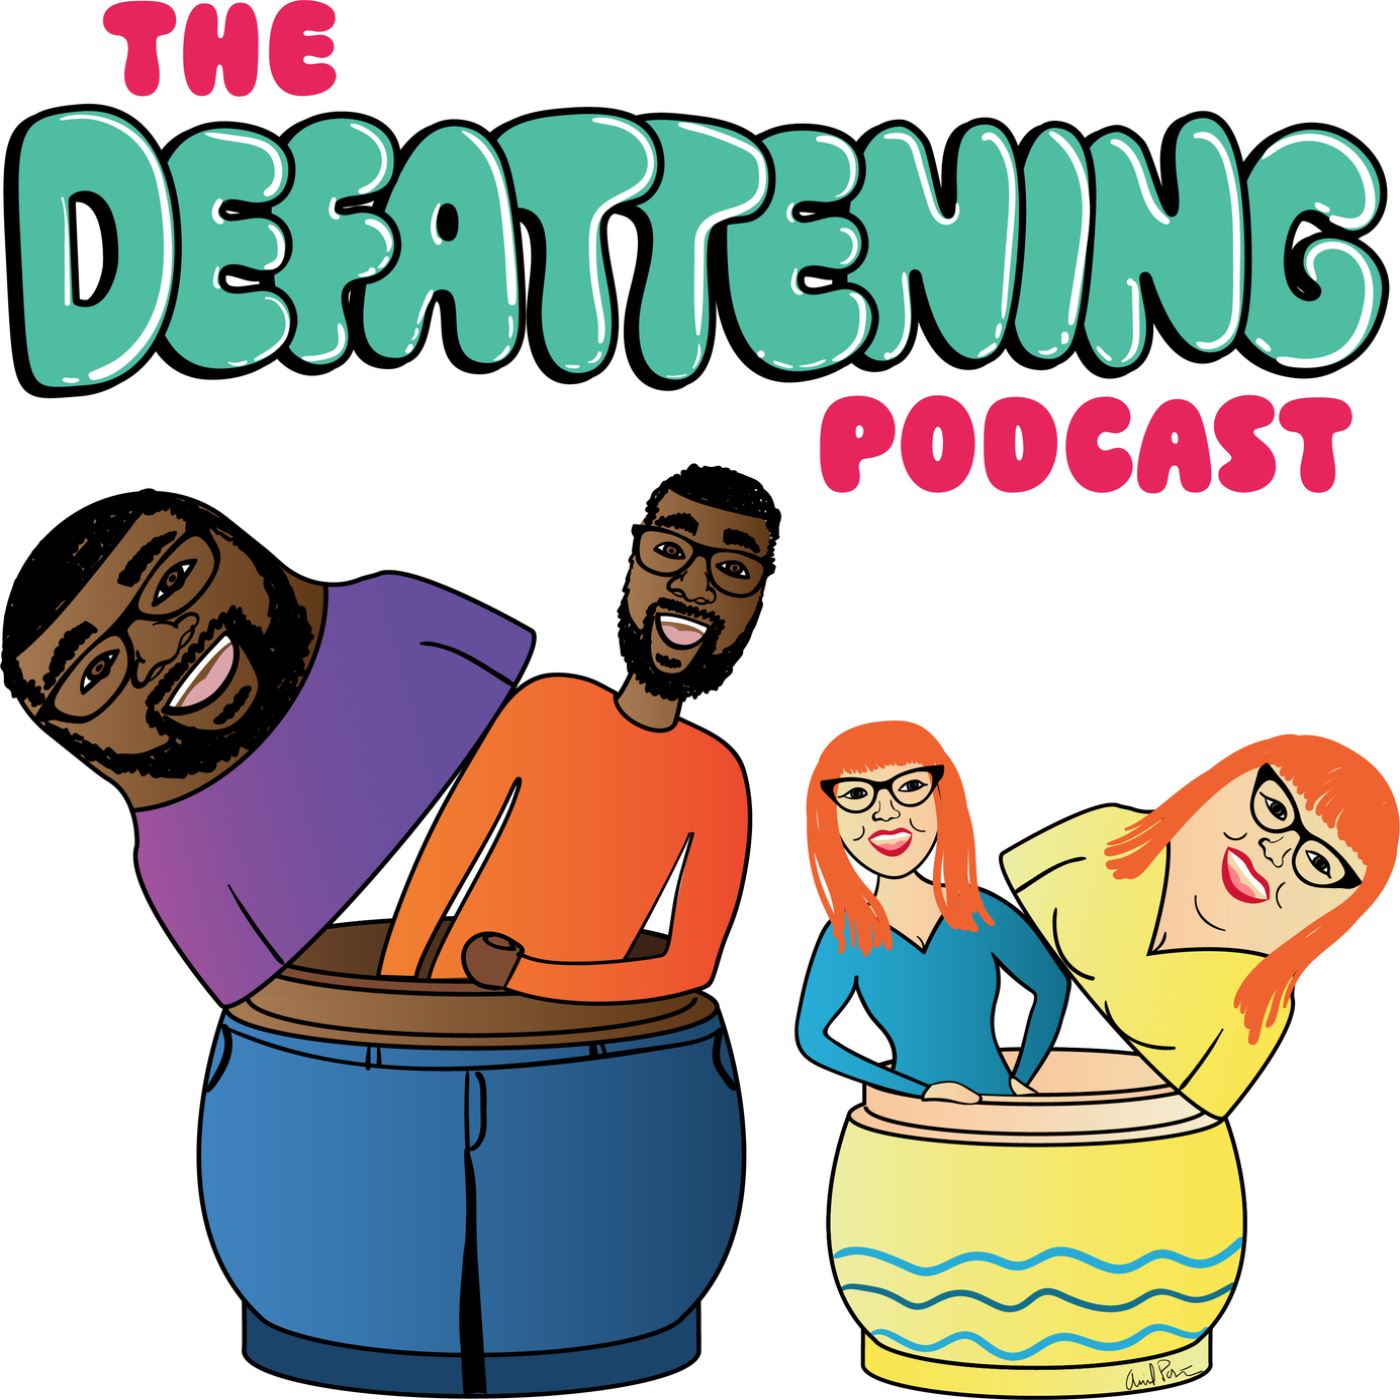 The Defattening Podcast